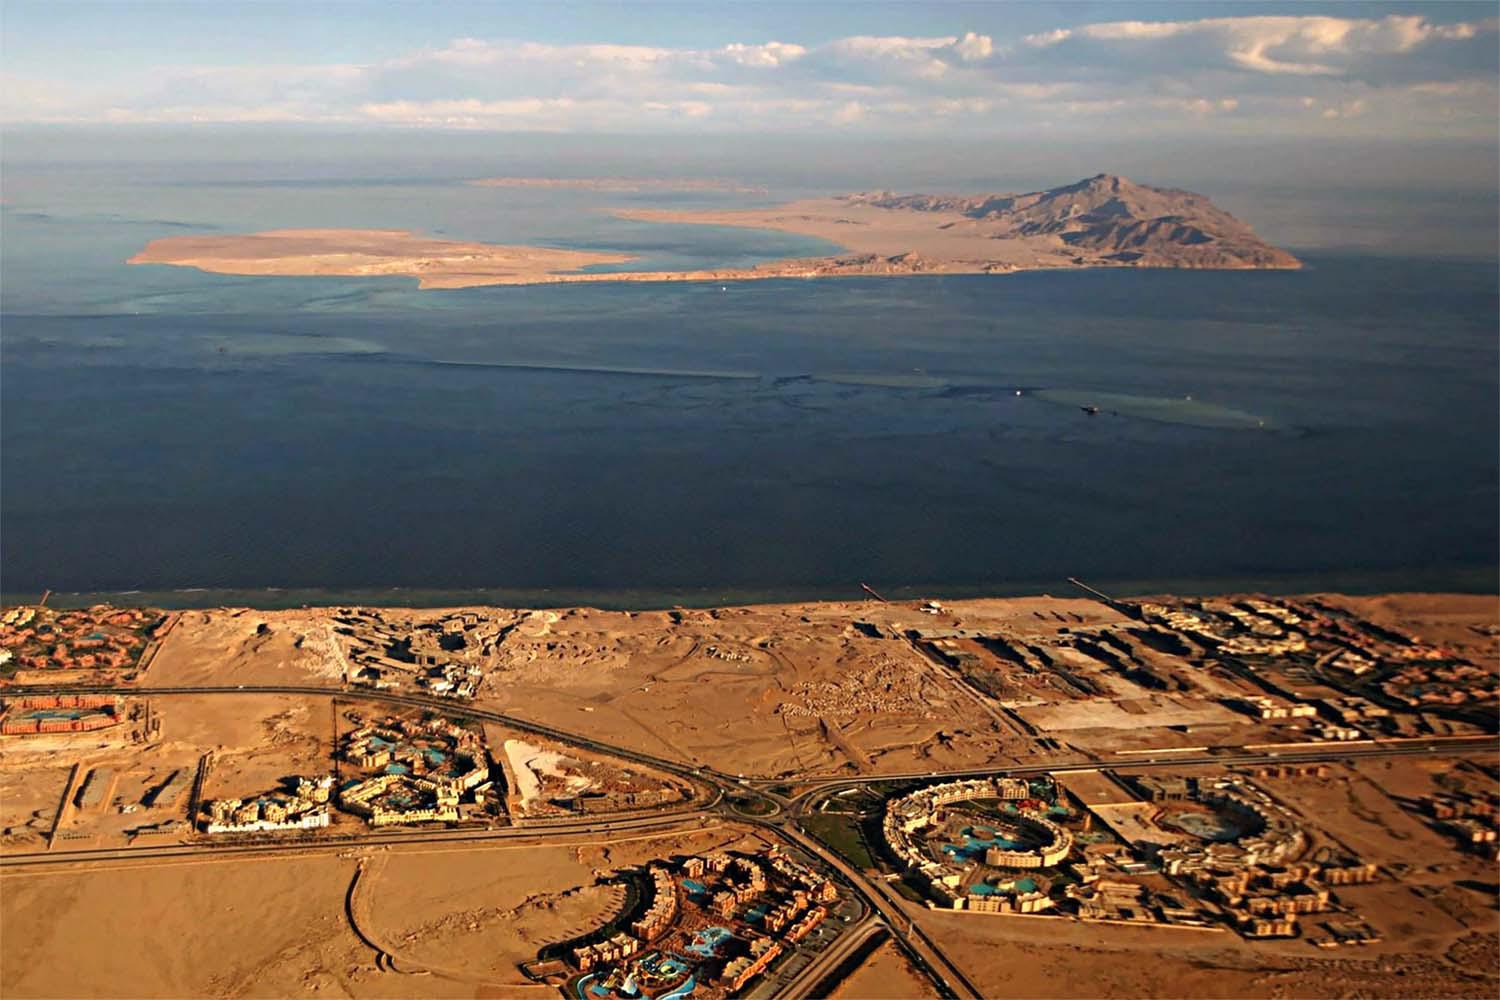 Abu Dhabi's sovereign wealth fund agreed to pay $24 billion for the rights to develop pristine land on Egypt's northern coast